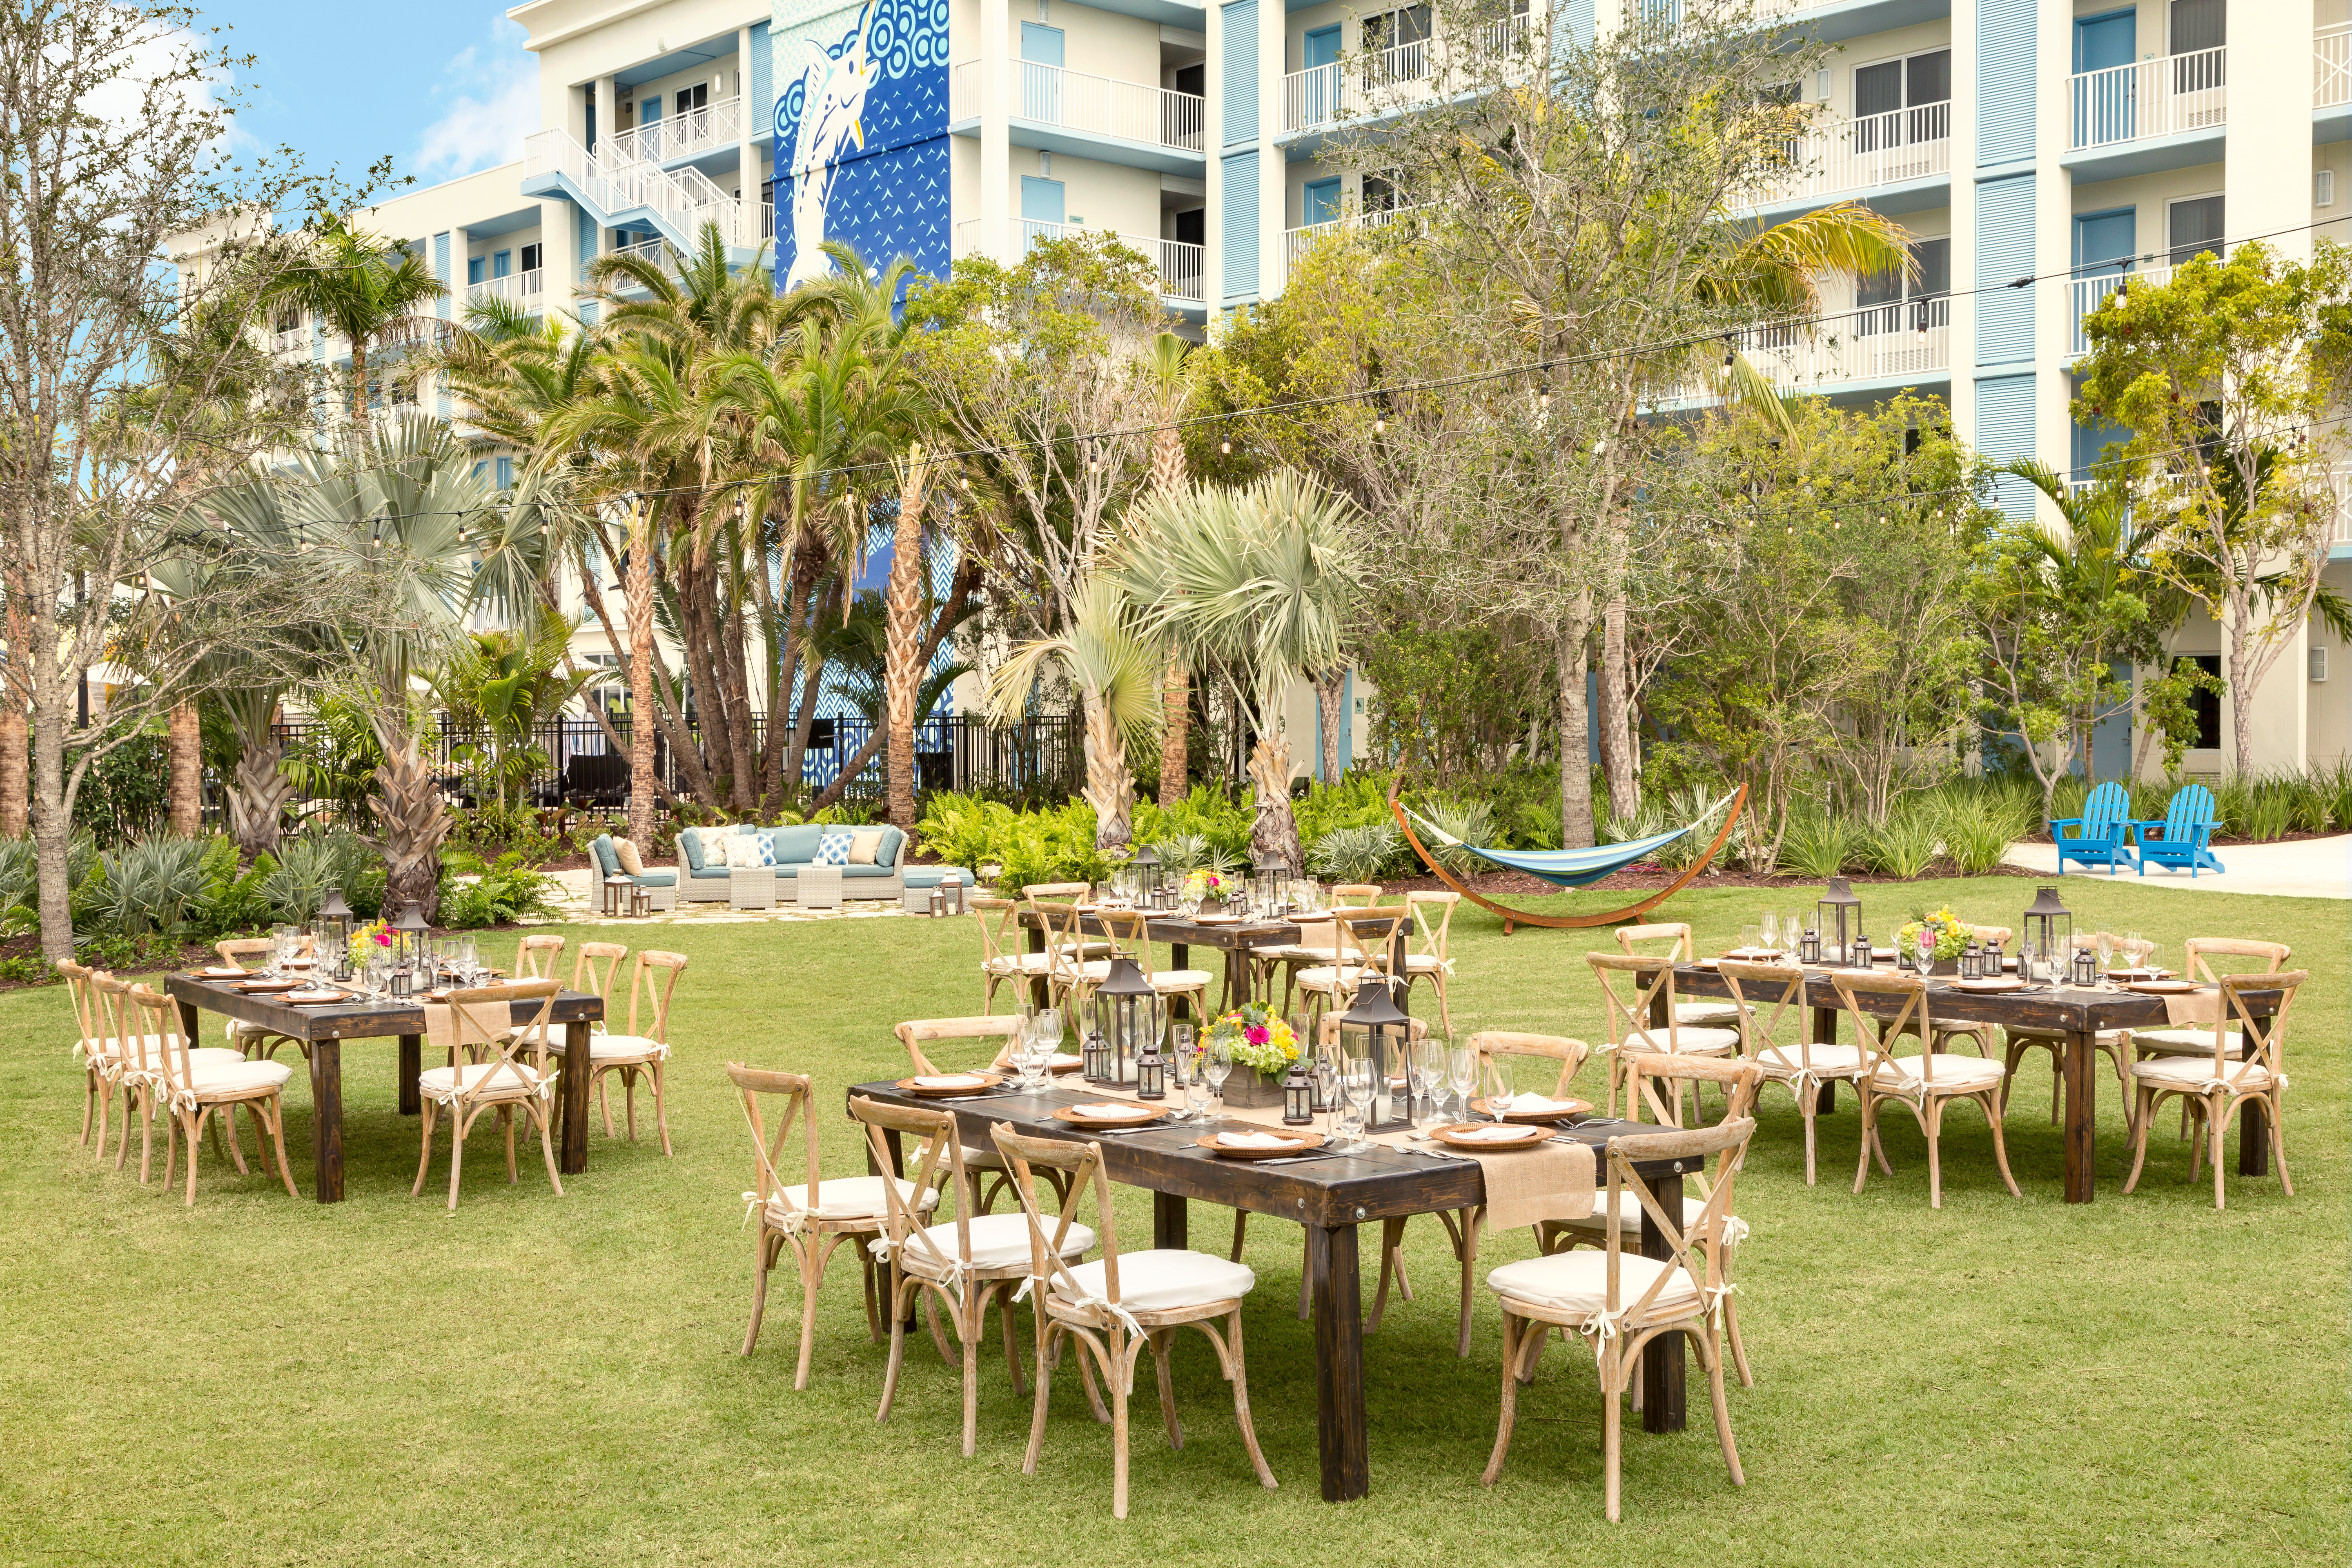 Hotel Garden Area with Dining Tables and Chairs at Daytime